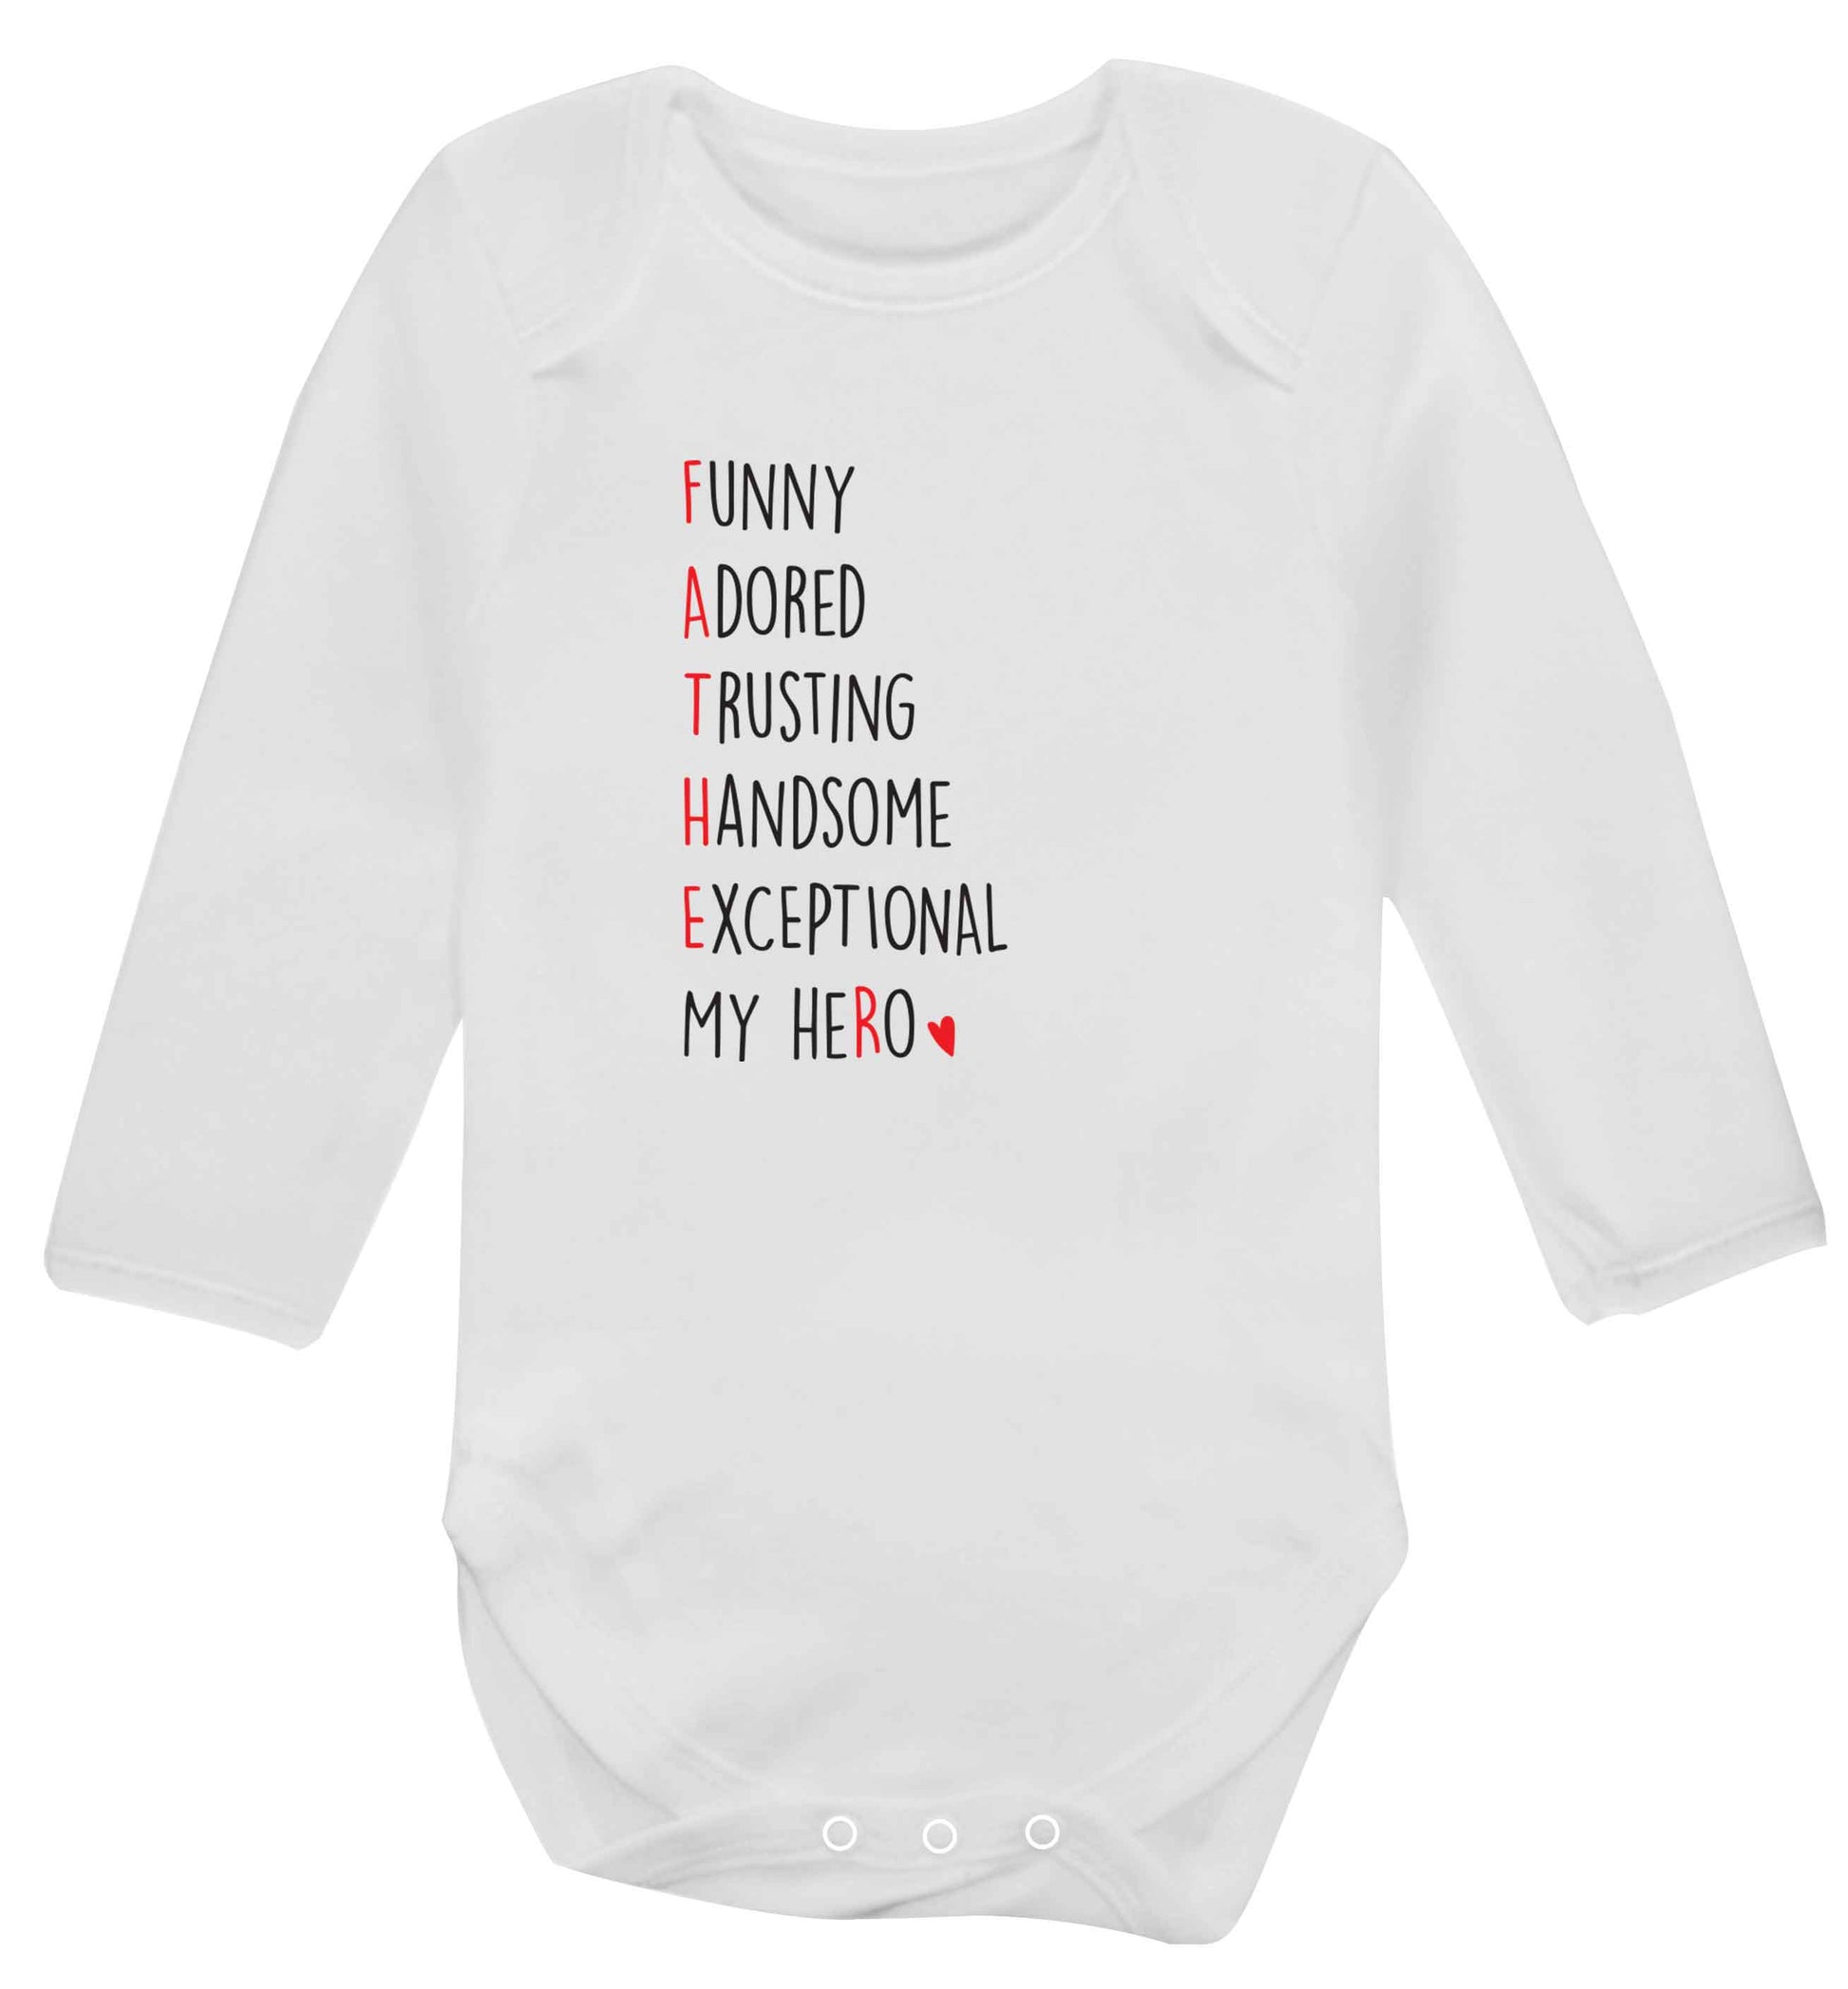 Father meaning hero acrostic poem baby vest long sleeved white 6-12 months